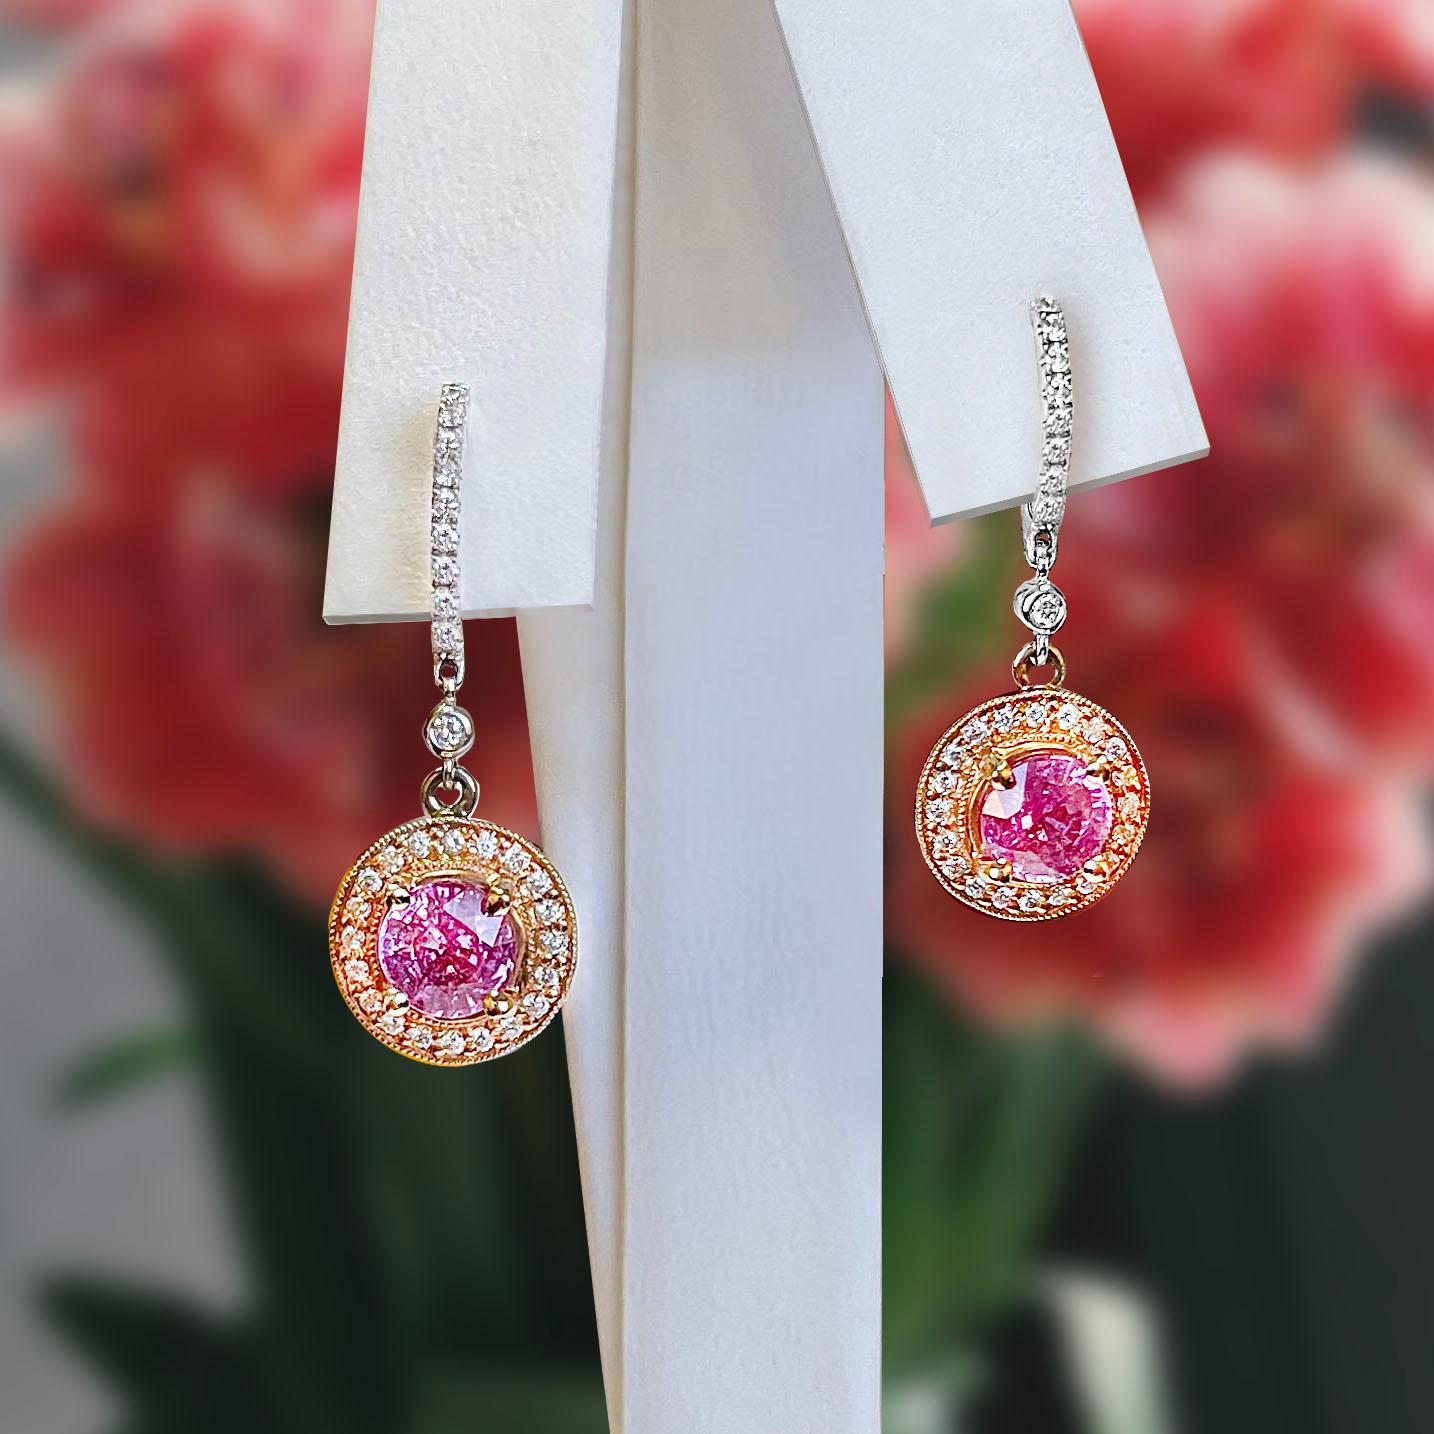 Round Cut Vitolo 18 Karat Gold Diamond Drop Earrings with Pink Sapphire For Sale